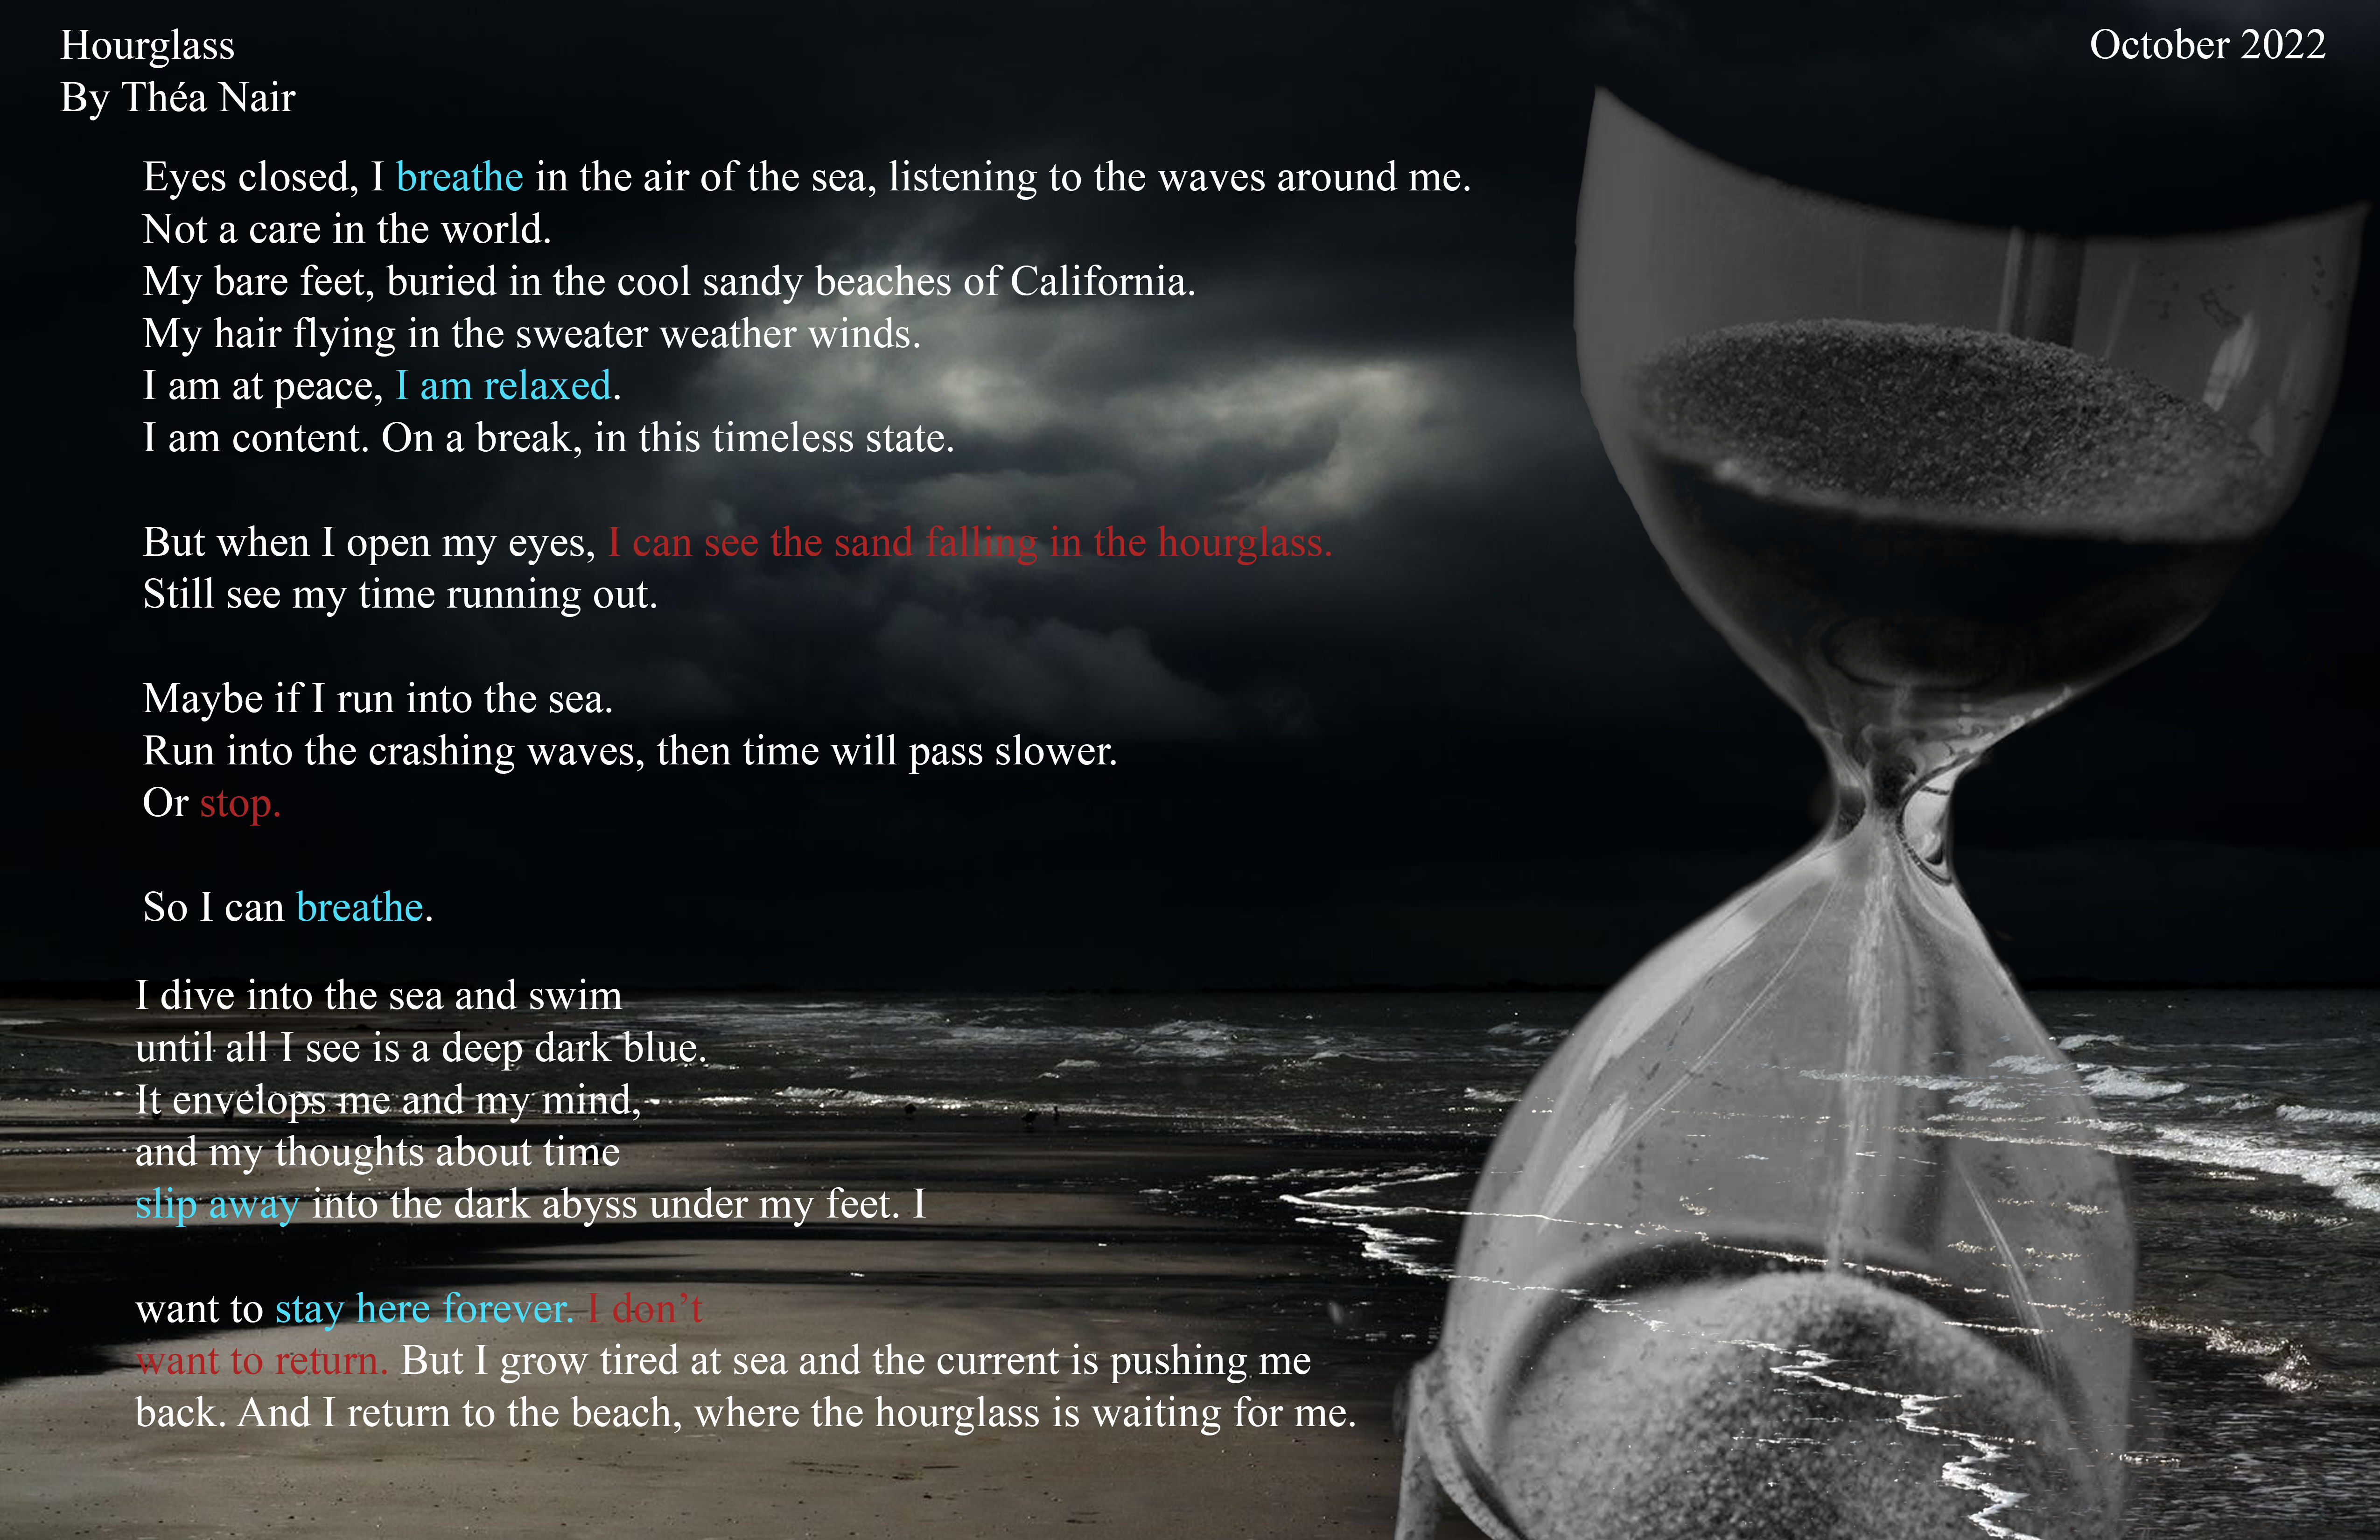 Poem by Thea Nair - Hourglass